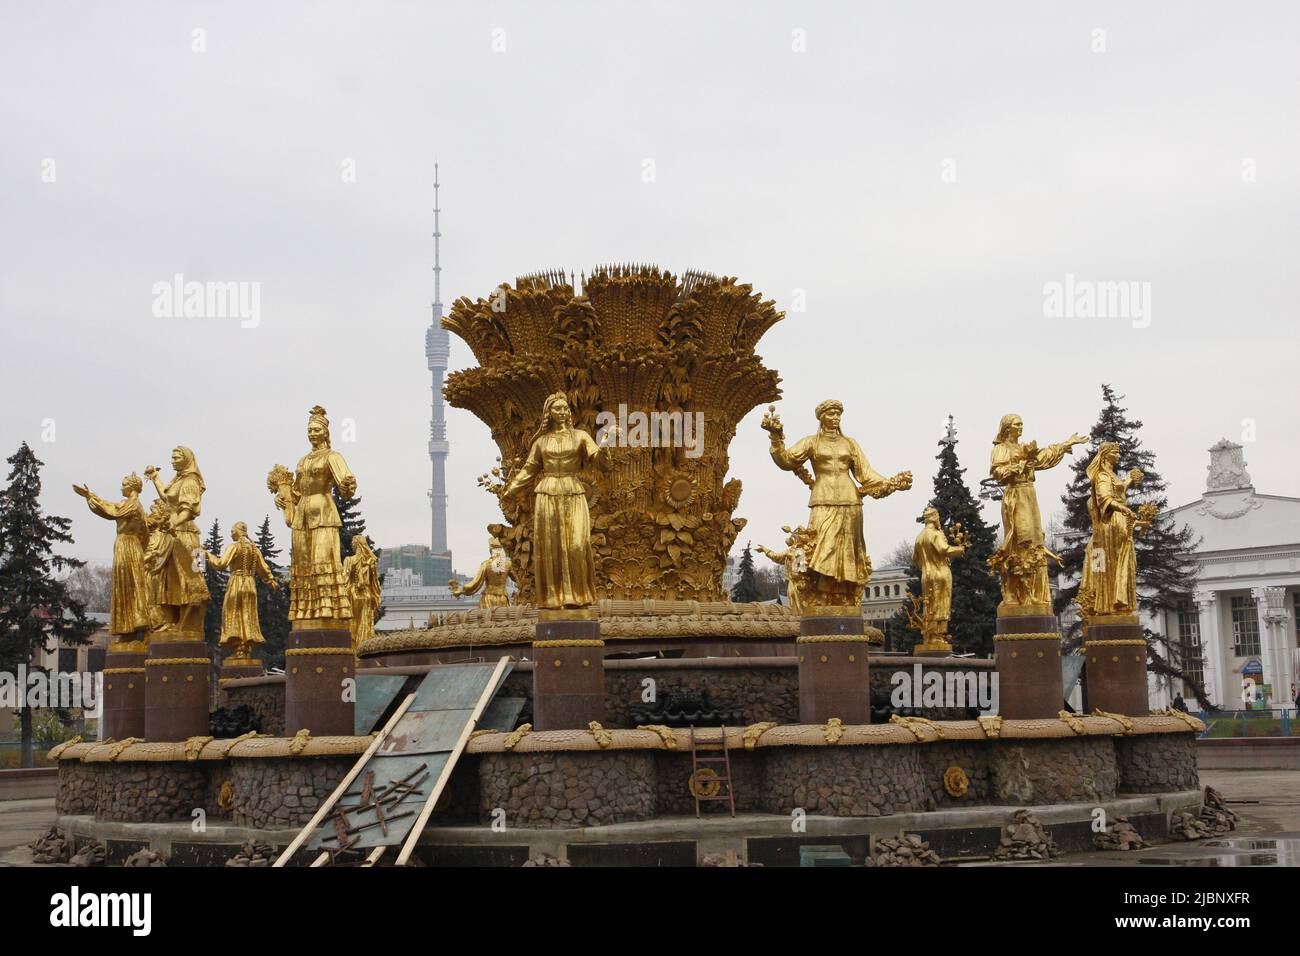 Golden covered female statues, symbols of 15 soviet republics in USSR at VDNKh - exhibition of the national economy in USSR, still popular in Moscow. Stock Photo